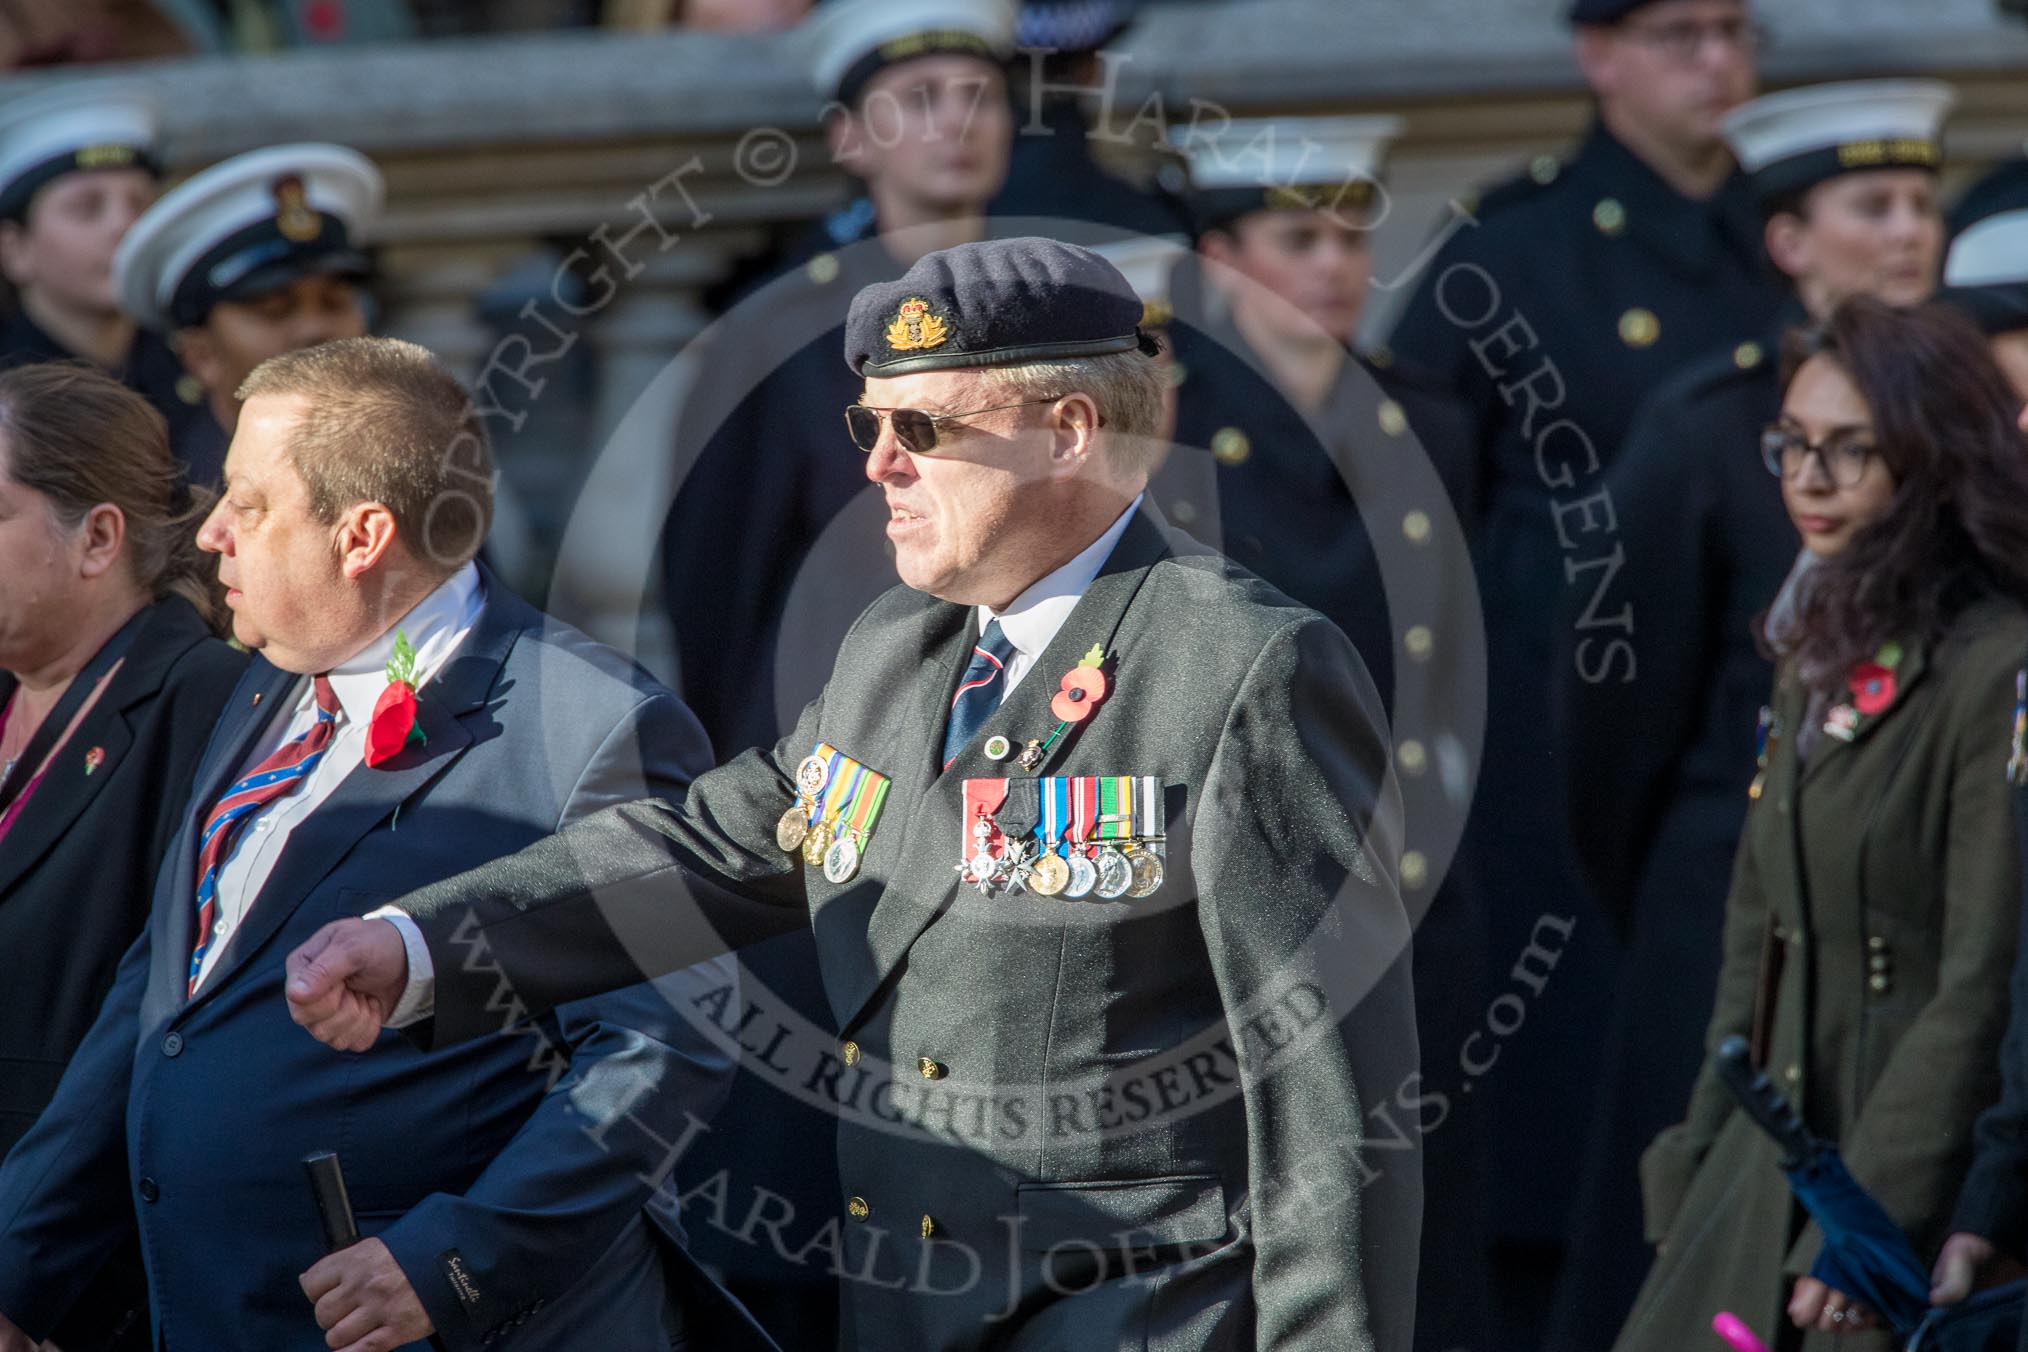 Western Front Association  (Group M27, 11 members) during the Royal British Legion March Past on Remembrance Sunday at the Cenotaph, Whitehall, Westminster, London, 11 November 2018, 12:28.